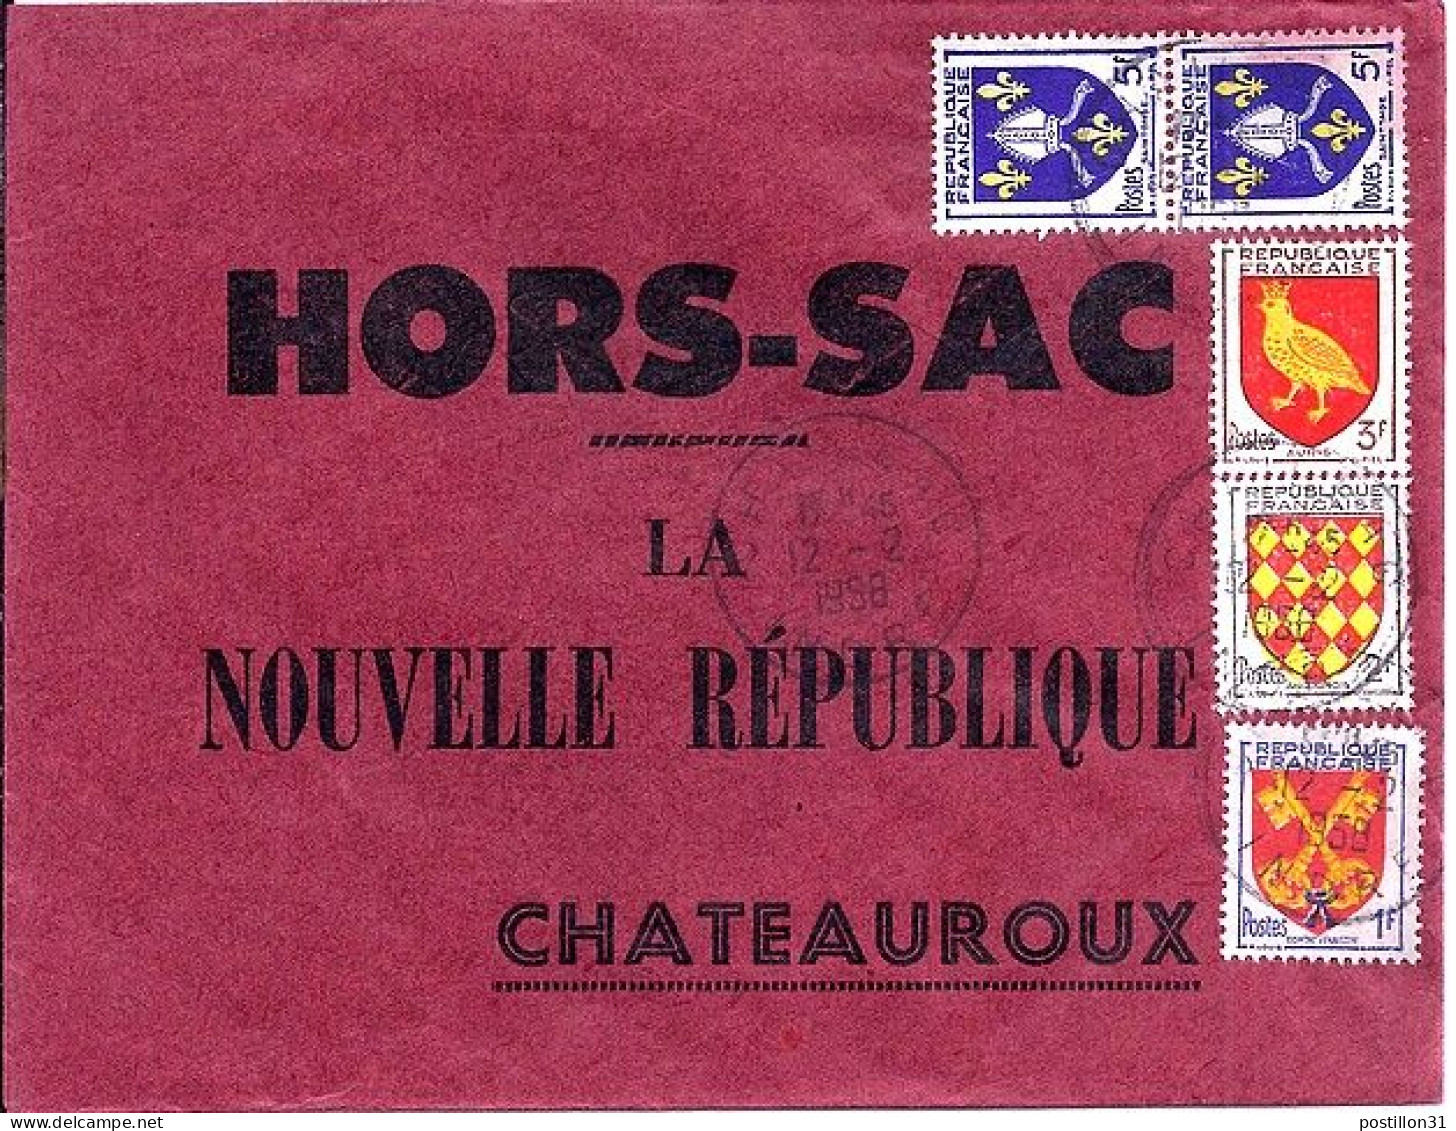 ARMOIRIES ET BLASONS N° 1005x2/1047/1004/1003 S/L.HORS SAC DE CHAILLAC/12.2.58 - 1941-66 Coat Of Arms And Heraldry